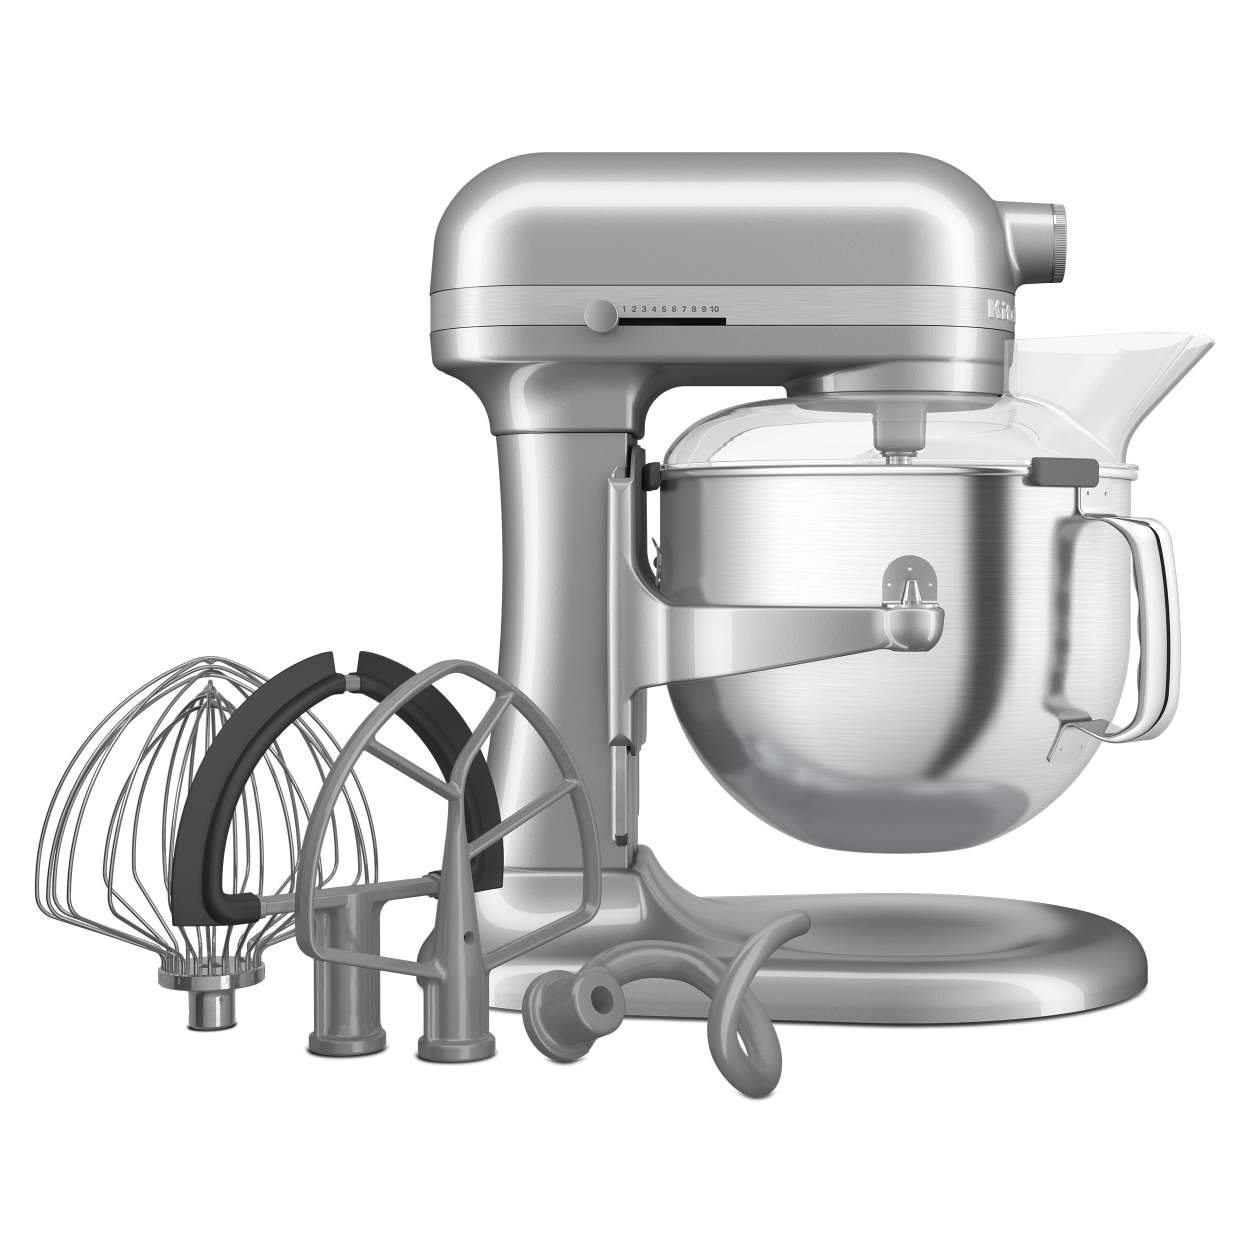 KitchenAid 7 Quart Bowl-Lift Stand Mixer in Black and Stainless Steel